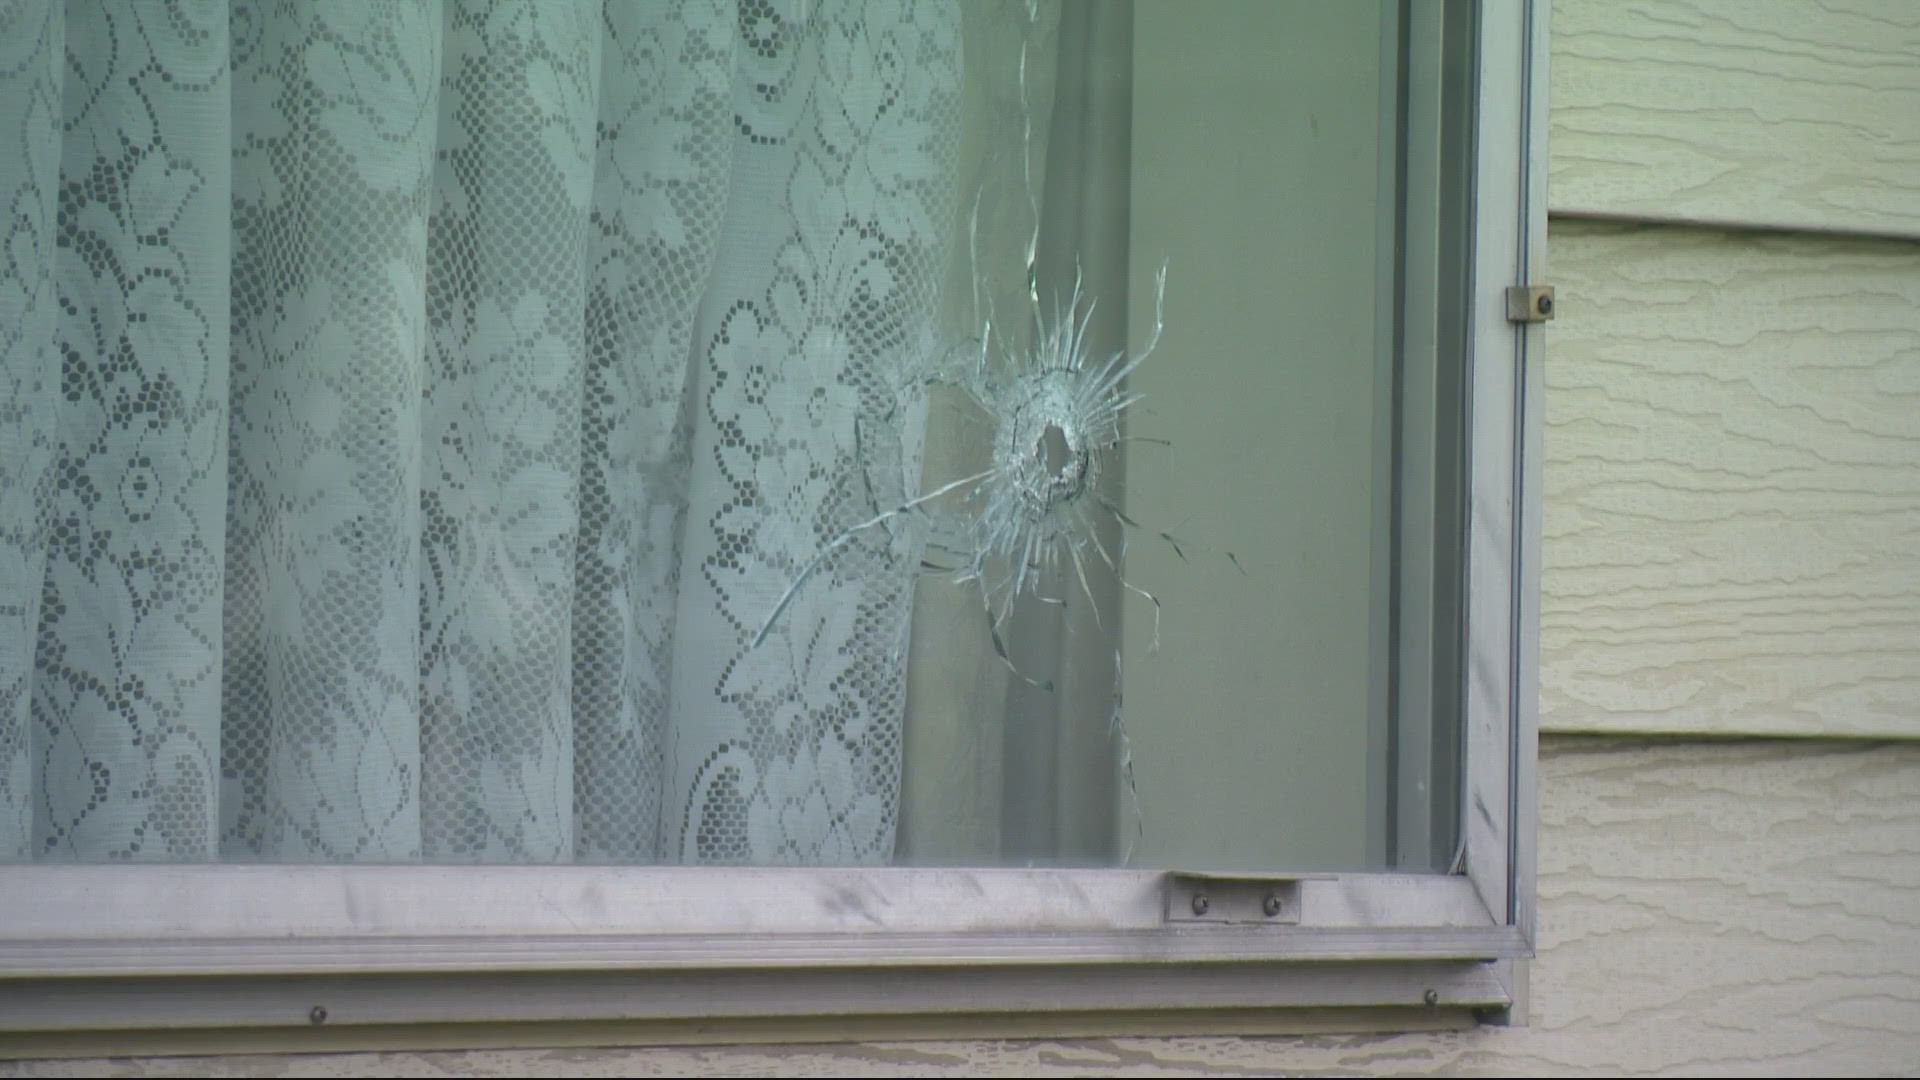 Three homes were hit with bullets just before 2 A.M. Sunday morning in Northeast Portland marking the third reported shooting this weekend.